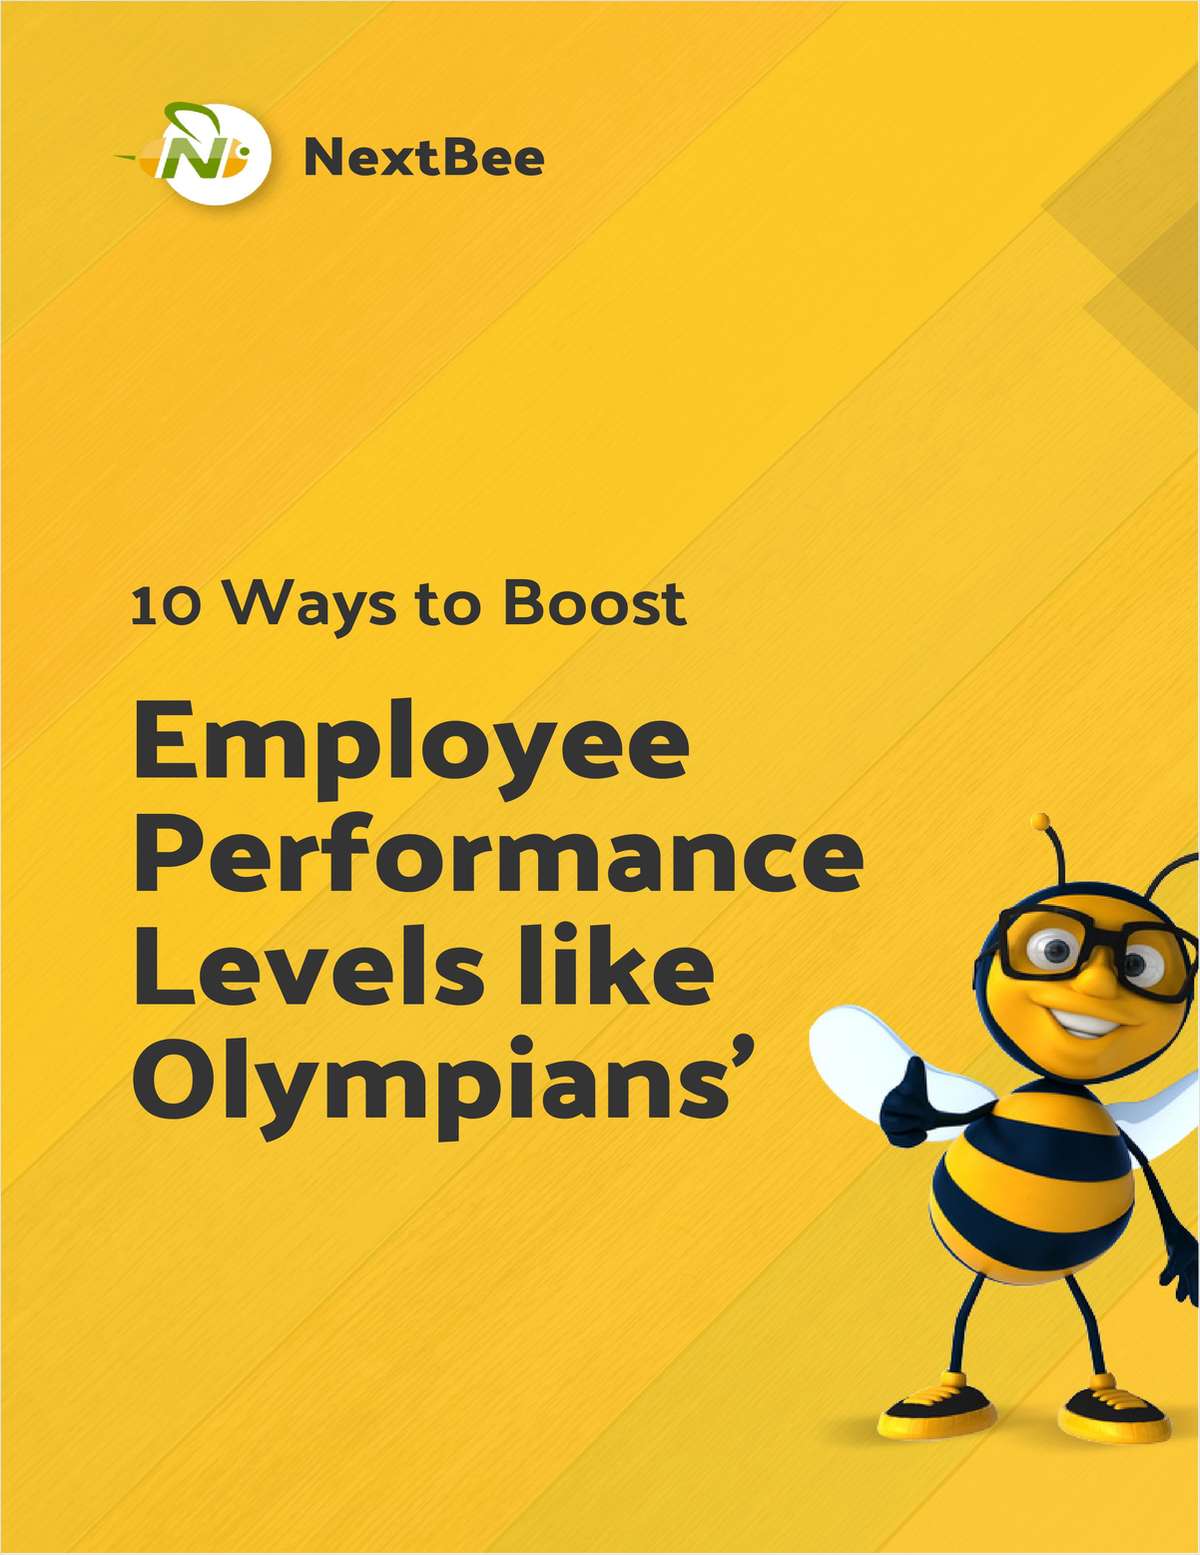 10 Ways to Boost Employee Performance Levels like Olympians